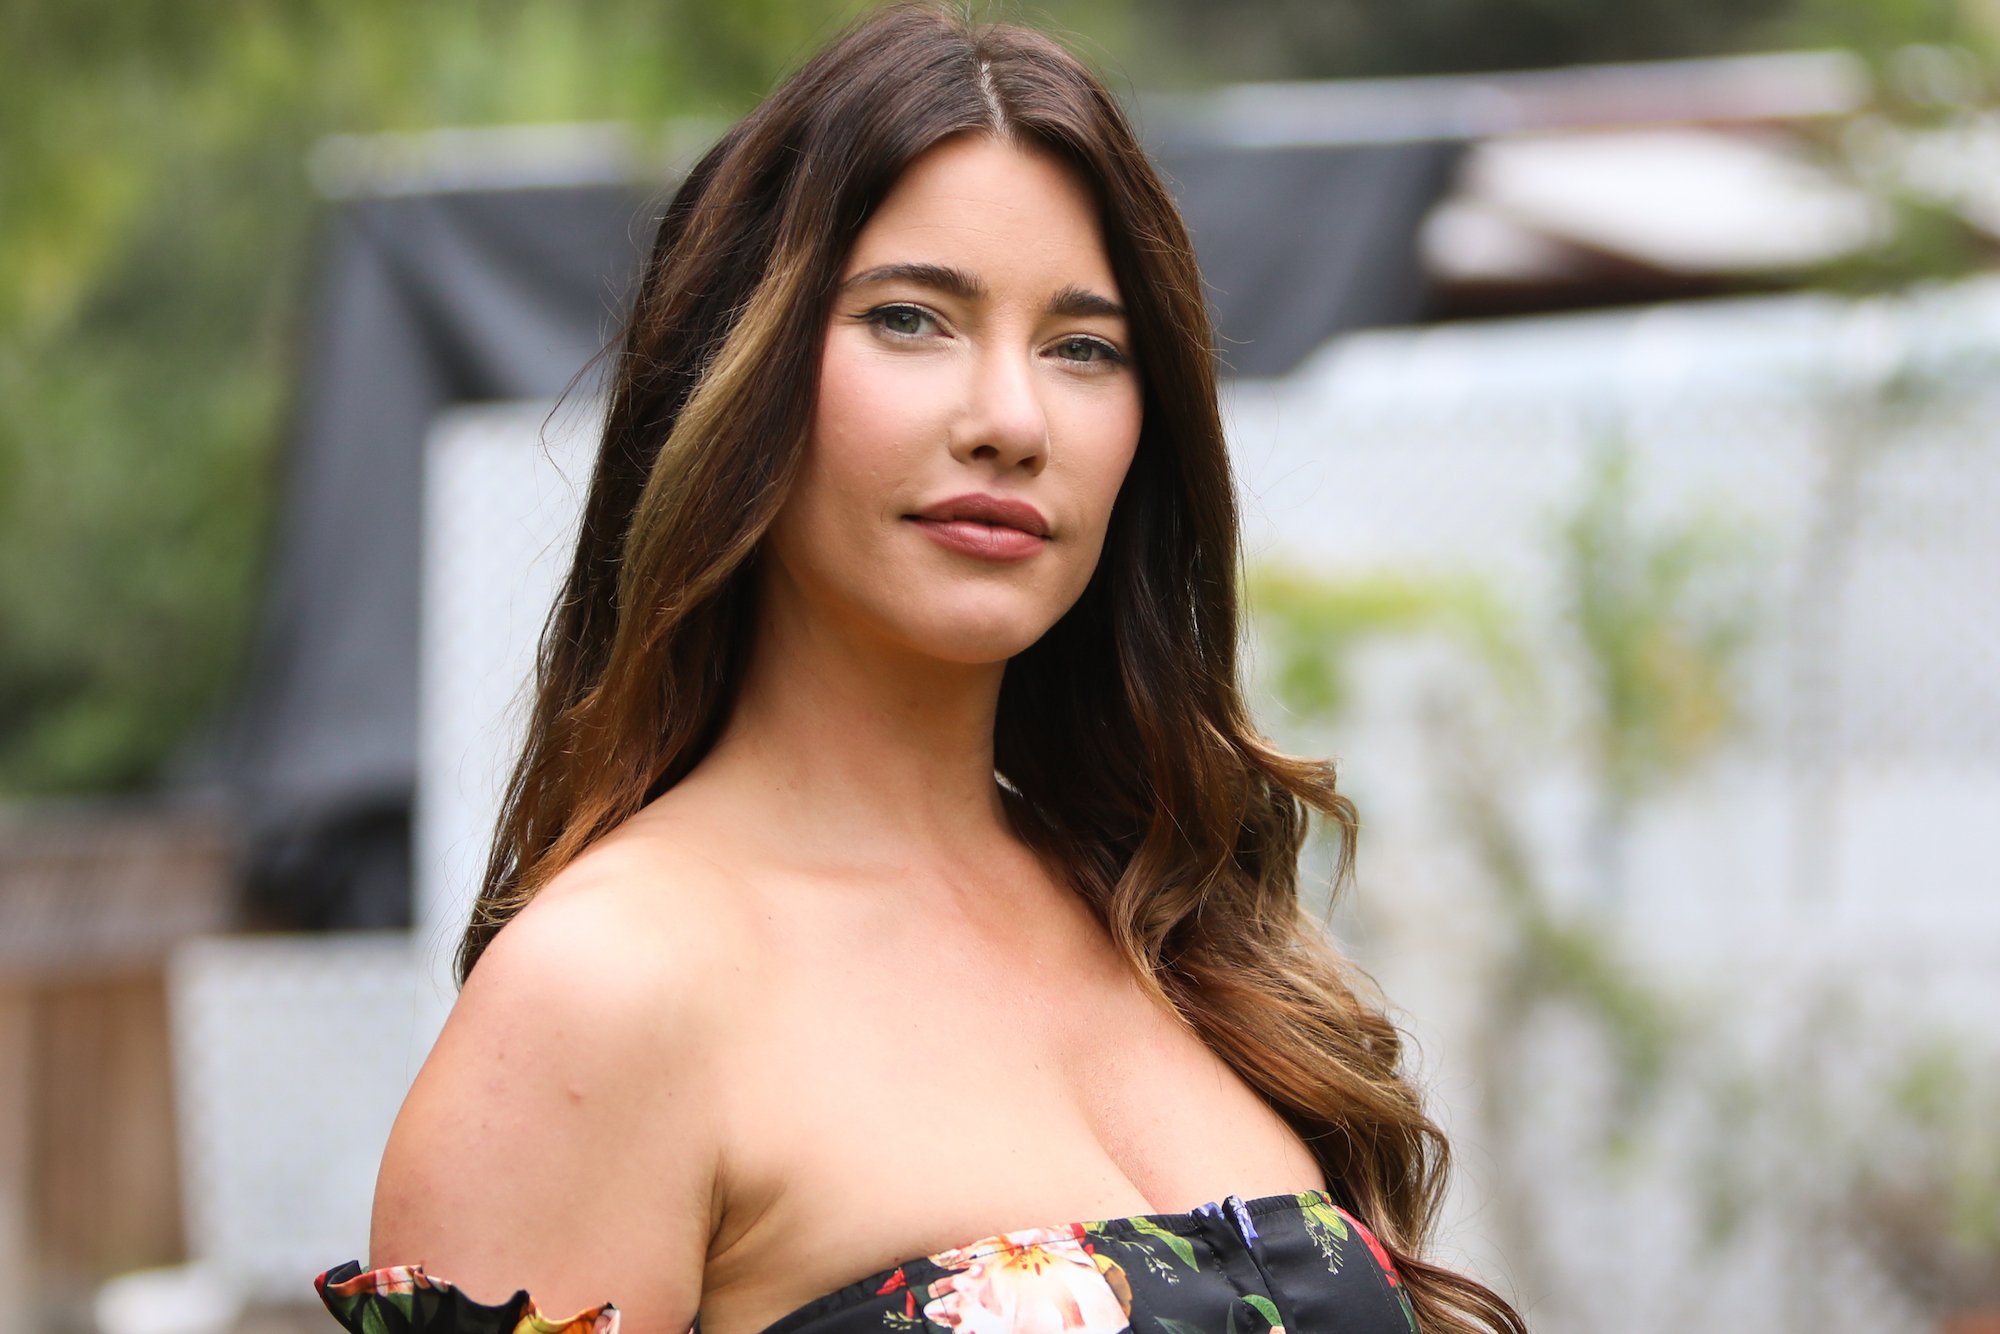 'The Bold and the Beautiful' actor Jacqueline MacInnes Wood during a 2019 appearance on Hallmark's 'Home and Family.'